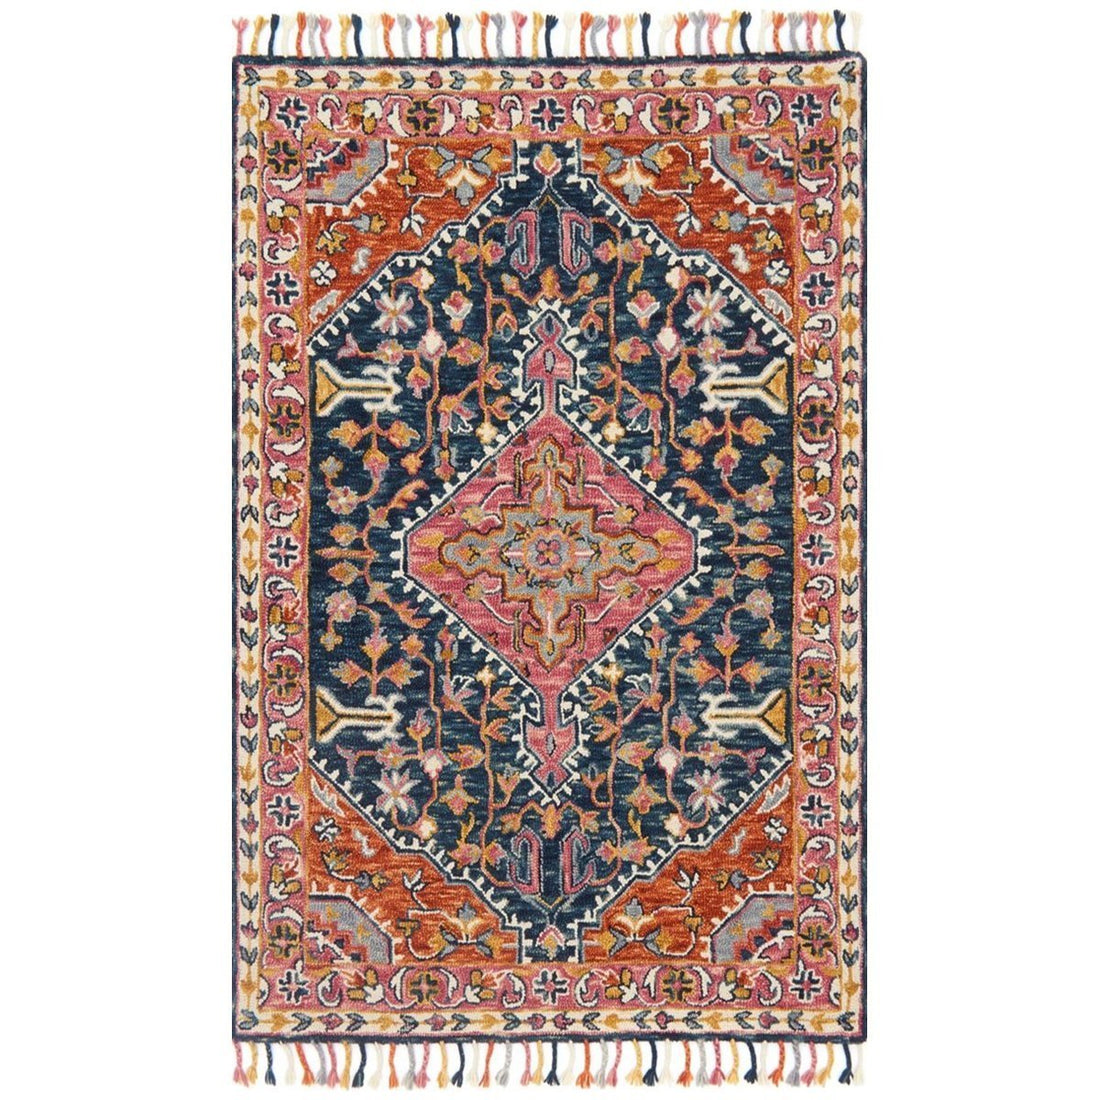 Loloi Zharah ZR-01 Hooked Rug